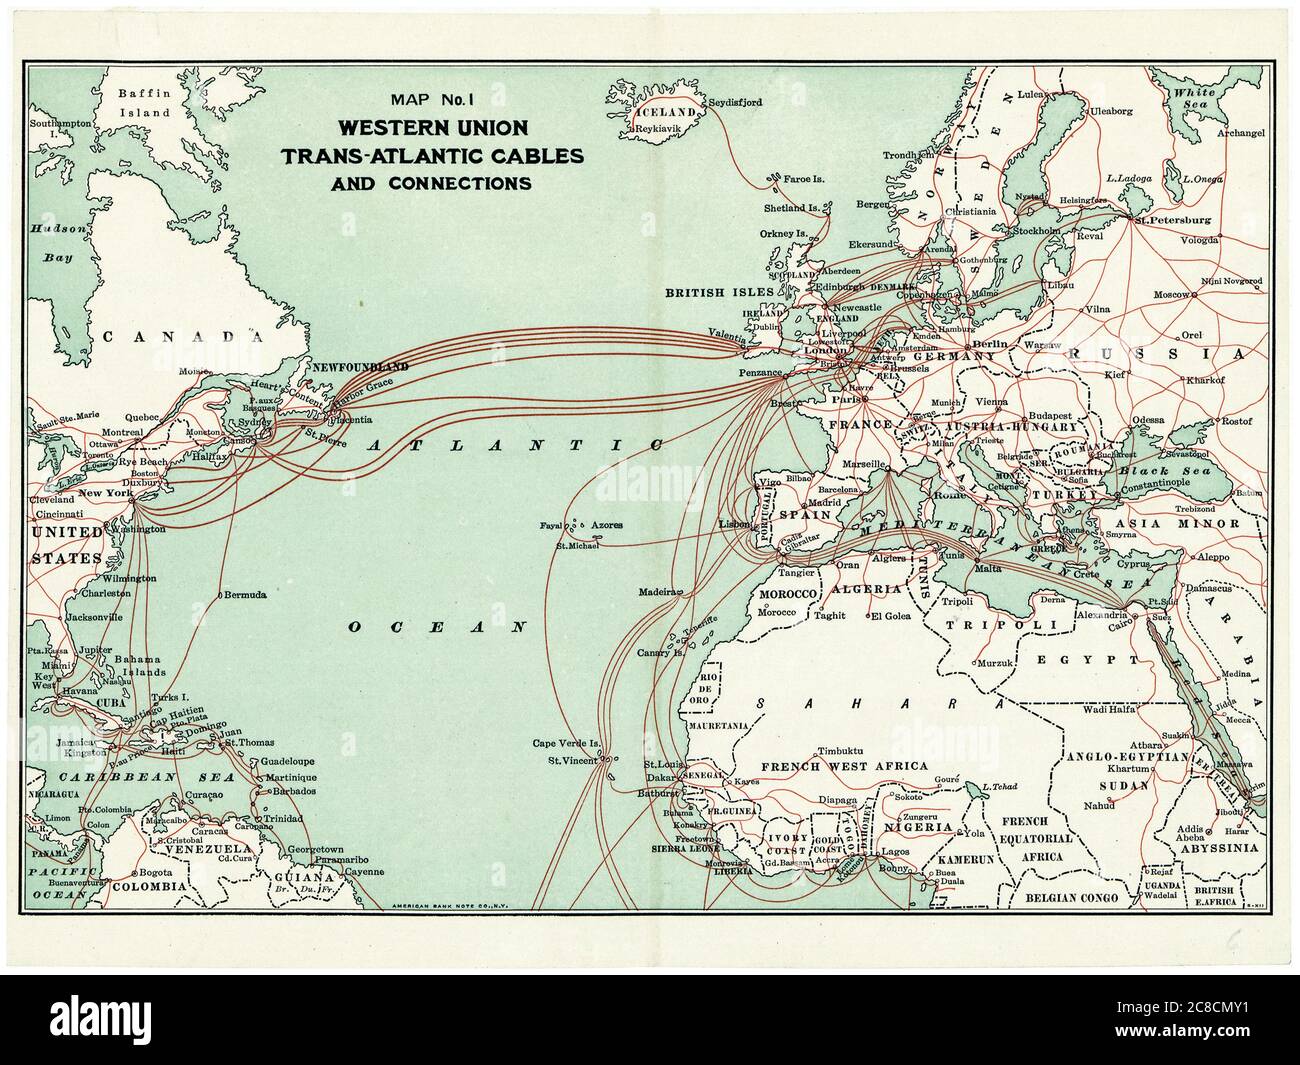 Western Union Transatlantic Cables map showing routes of undersea Telegraph Cables, by Western Union Telegraph Company, 1900 Stock Photo